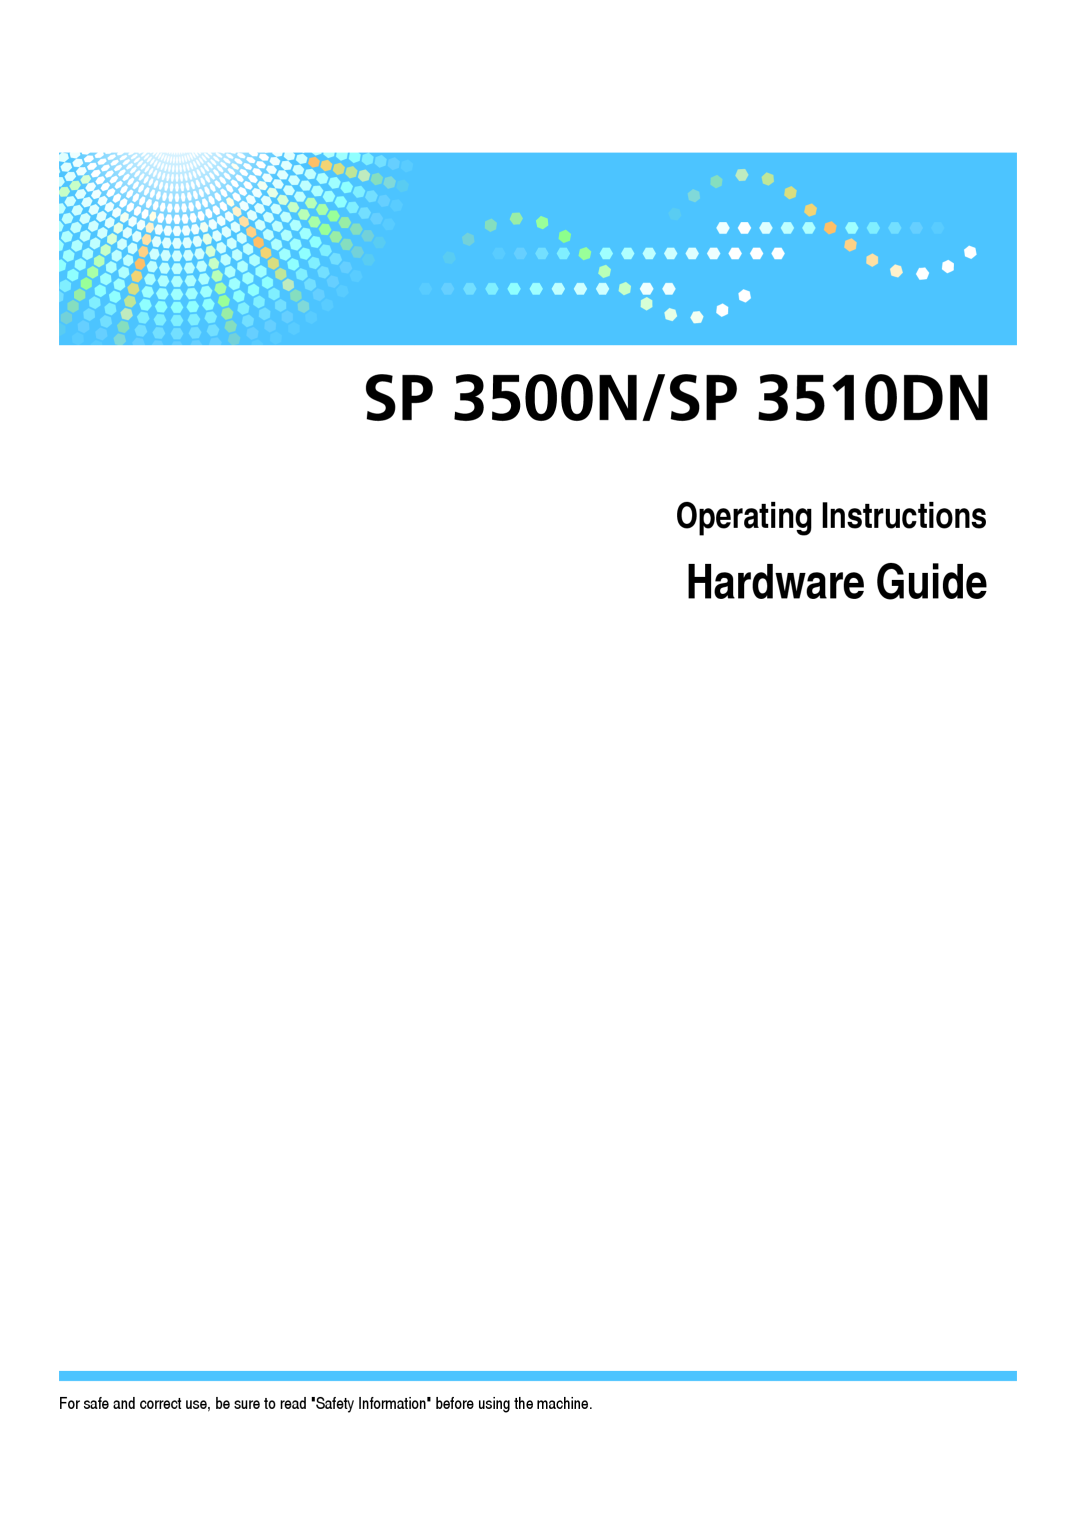 Ricoh SP 3500N, SP 3510DN manual Hardware Guide, Operating Instructions 